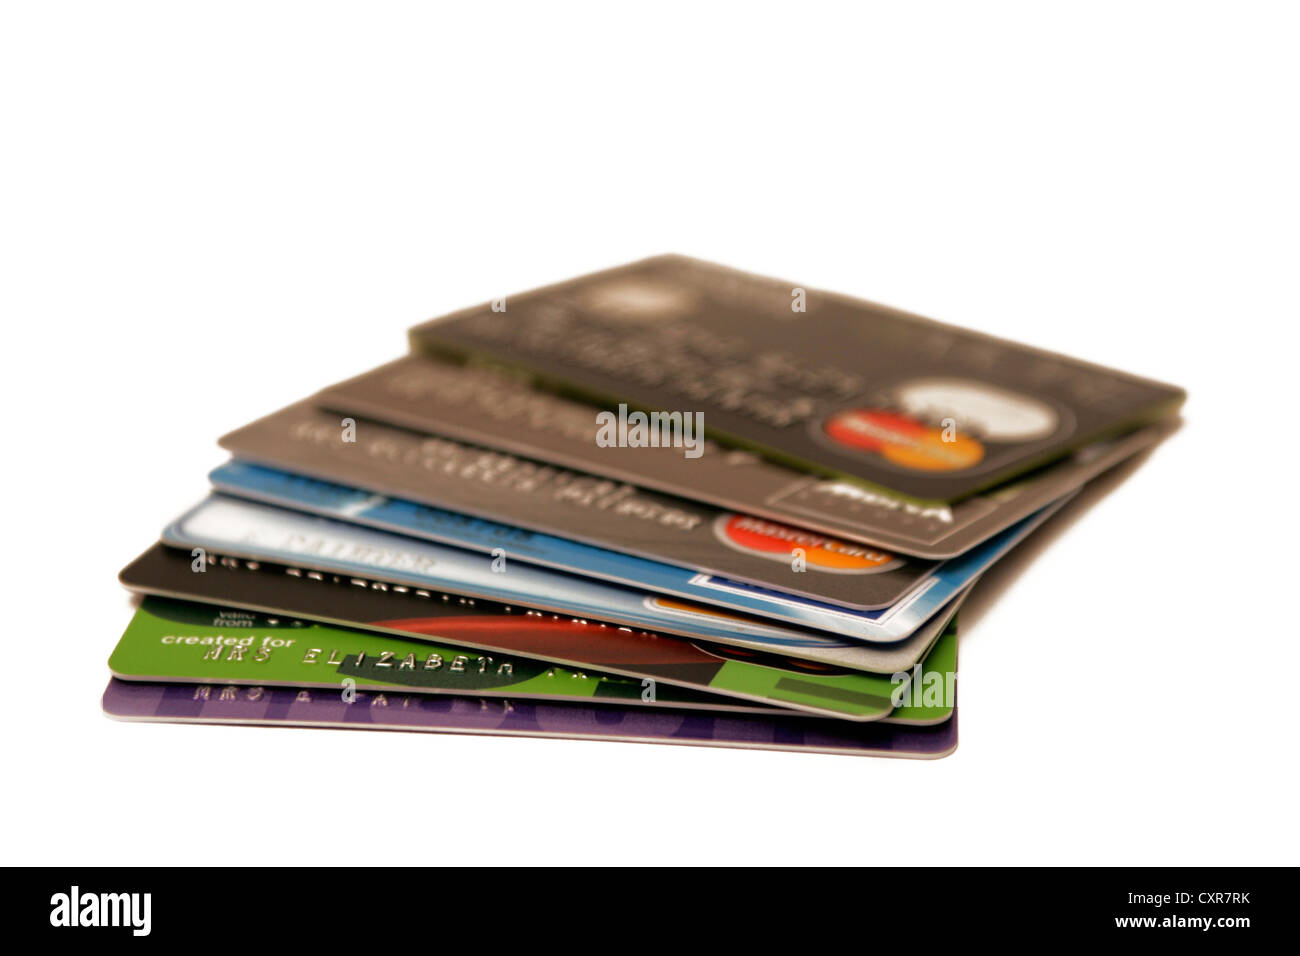 Pile of credit cards on white background, easy money on credit, financial troubles, cut out & balance transfers. Stock Photo